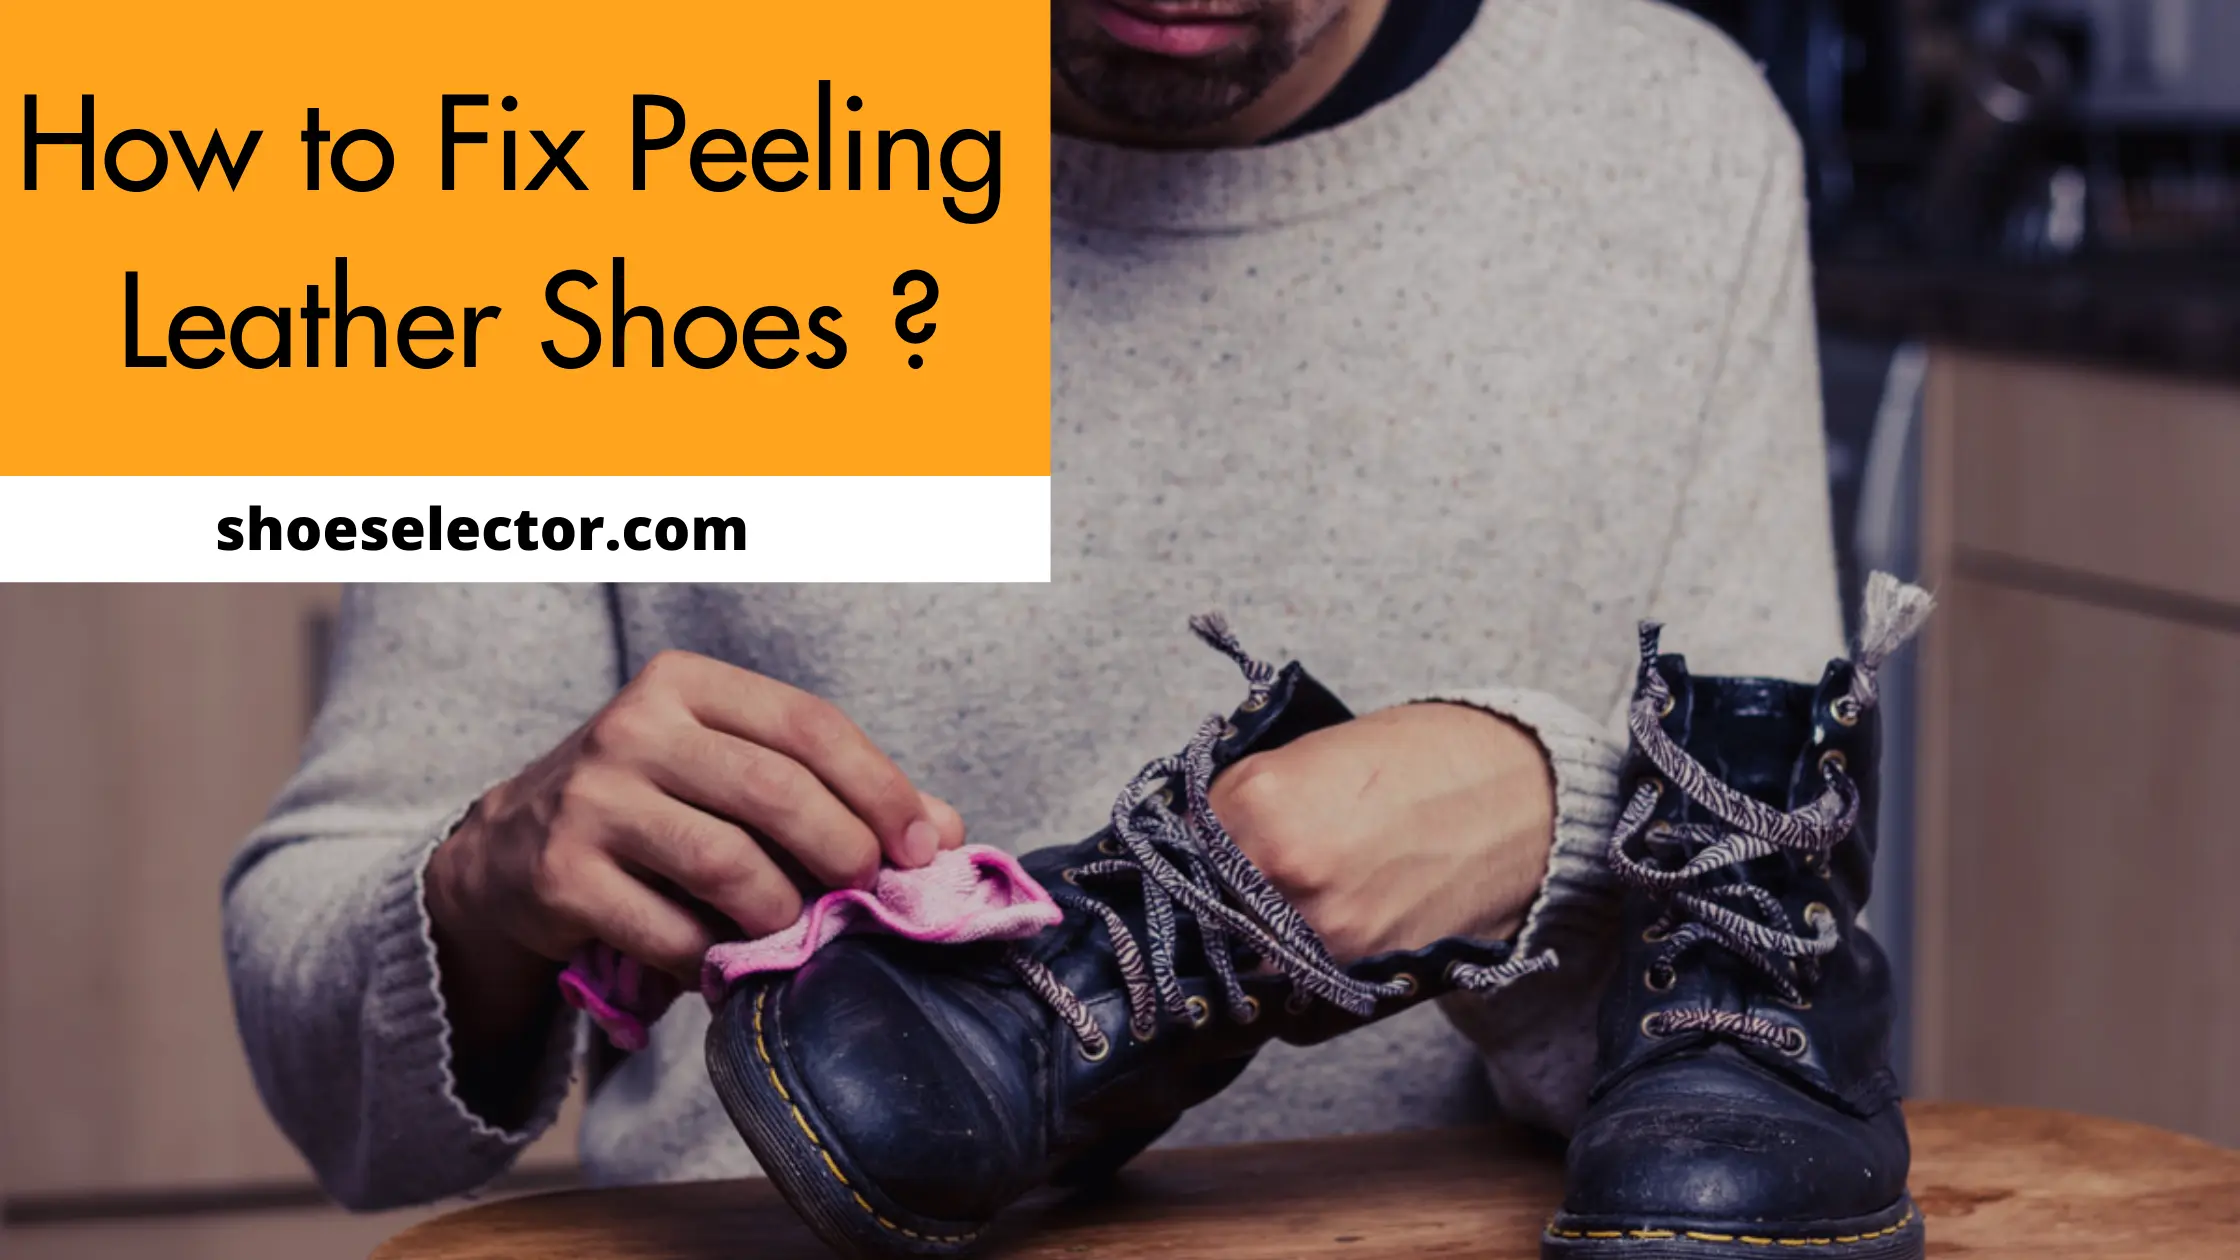 How to Fix Peeling Leather Shoes? - Easy Guide